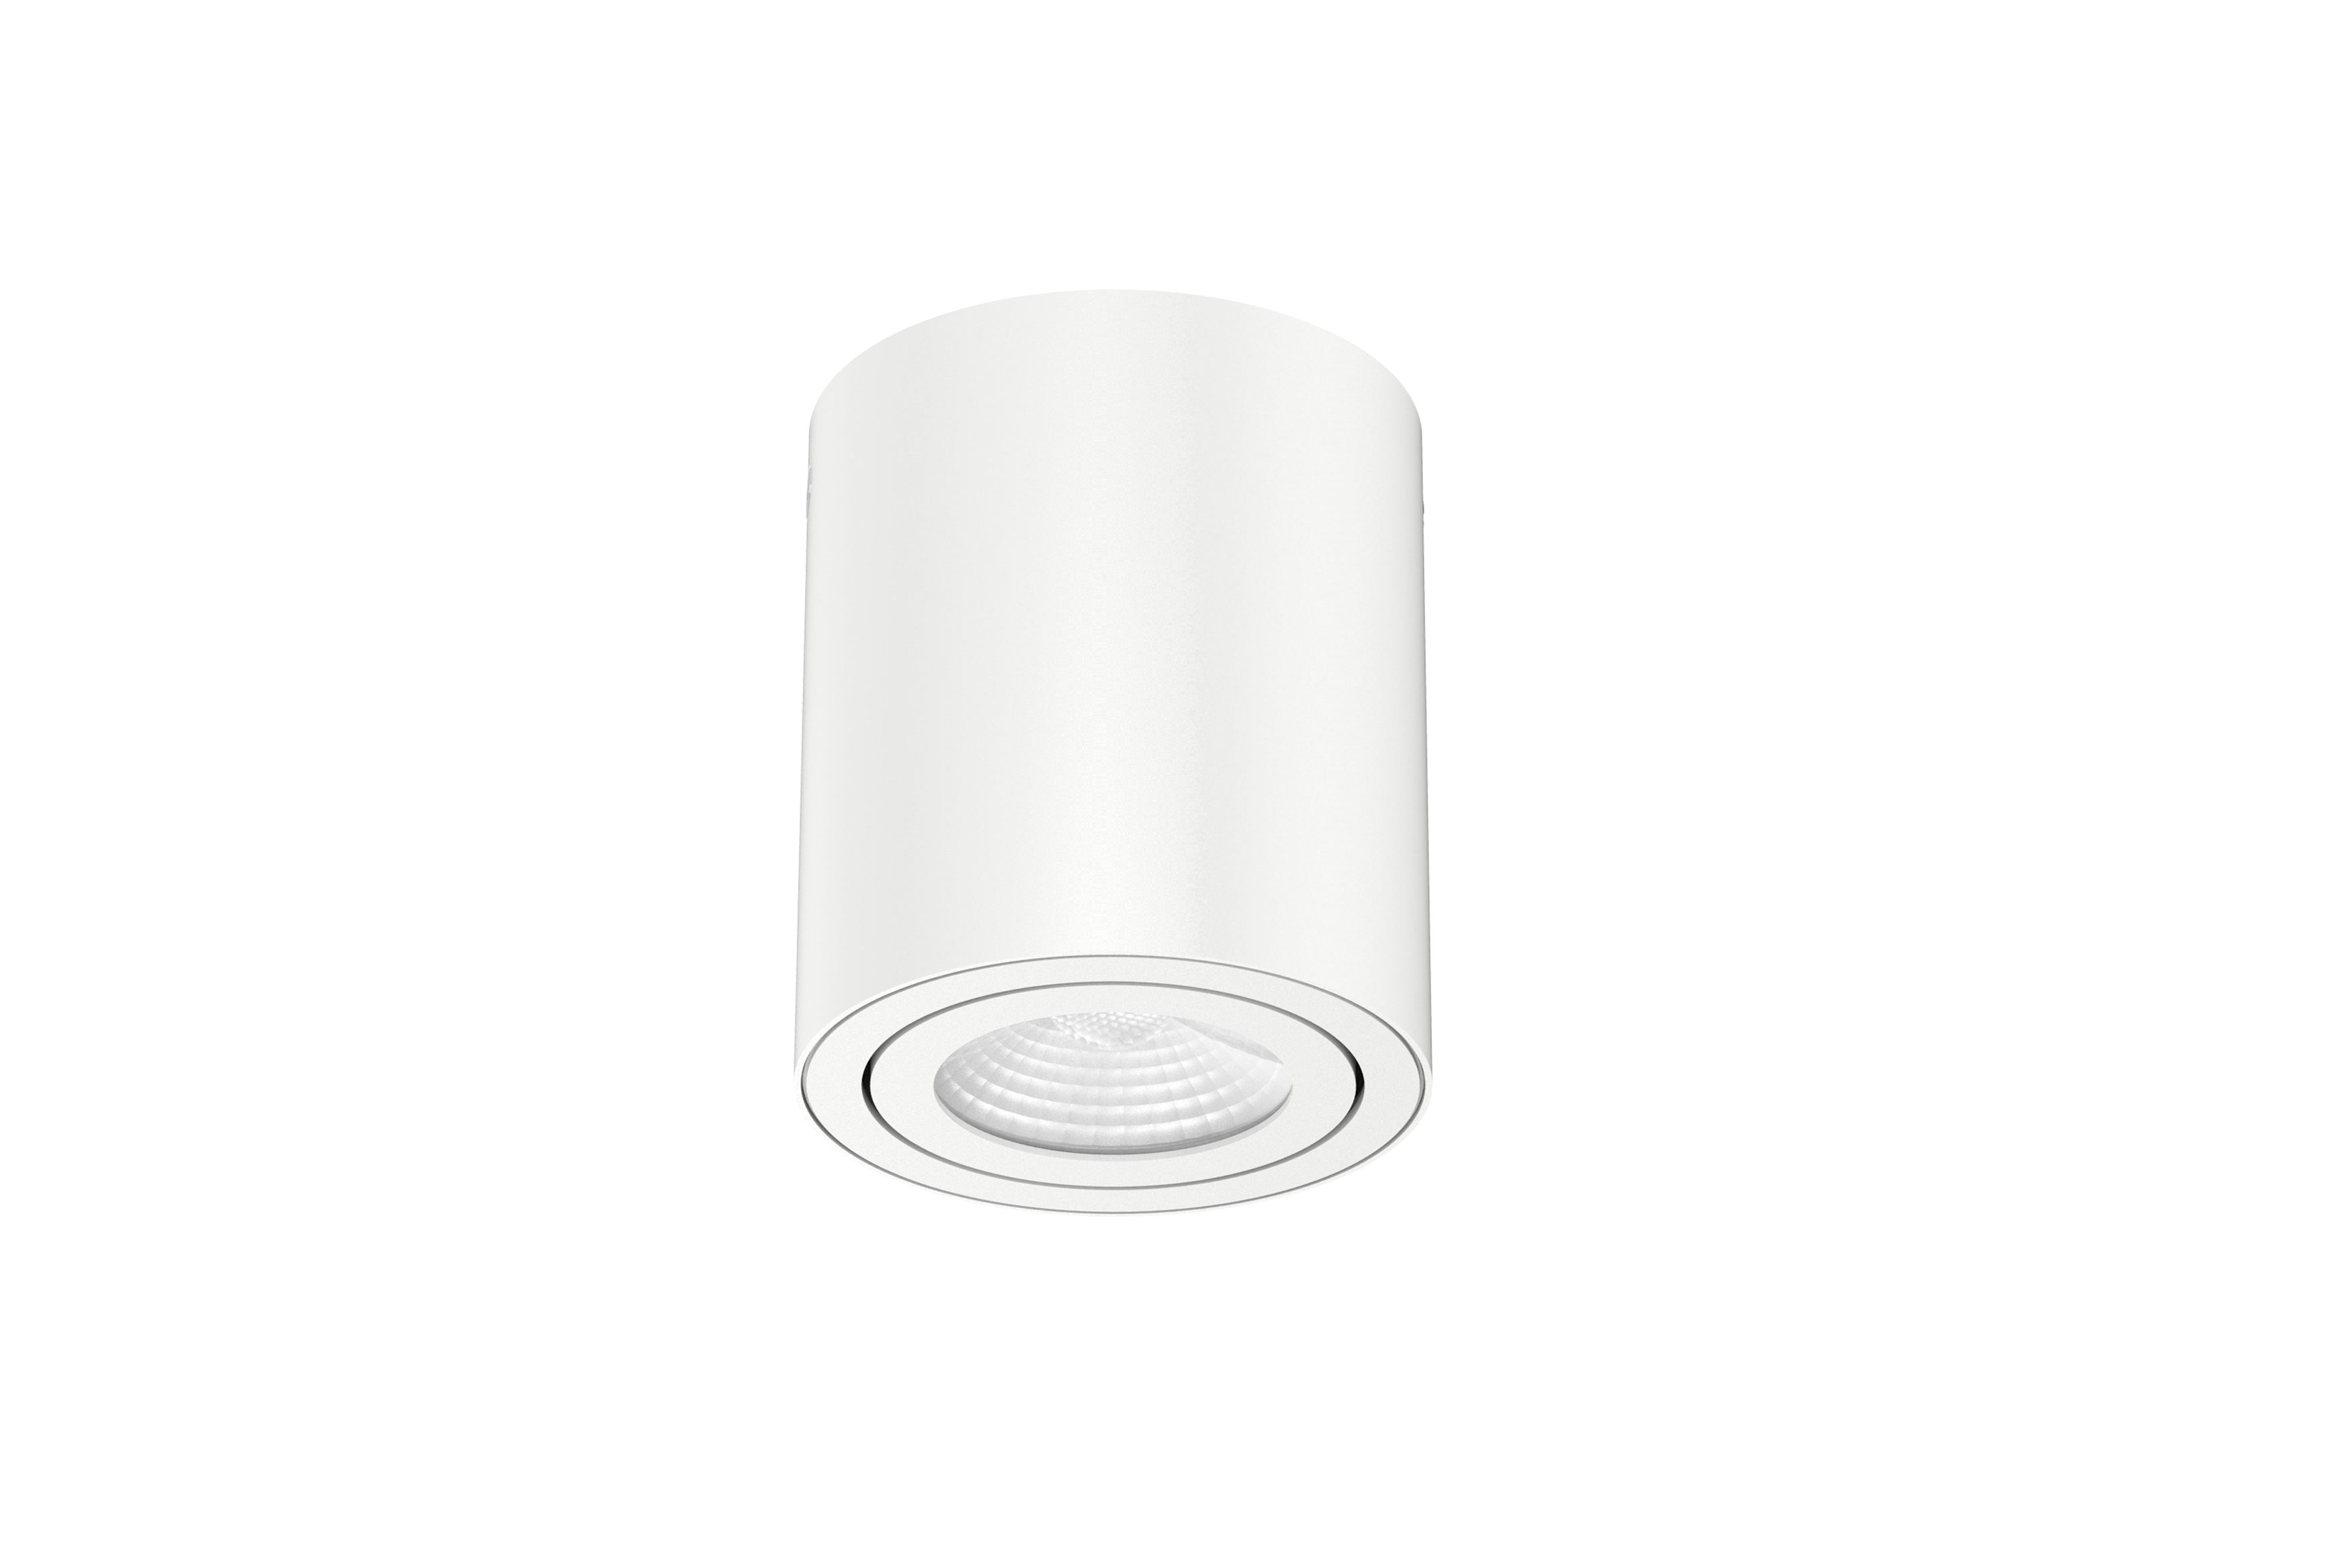 DL130 1 Round Surface Mounted Cylinder Downlight